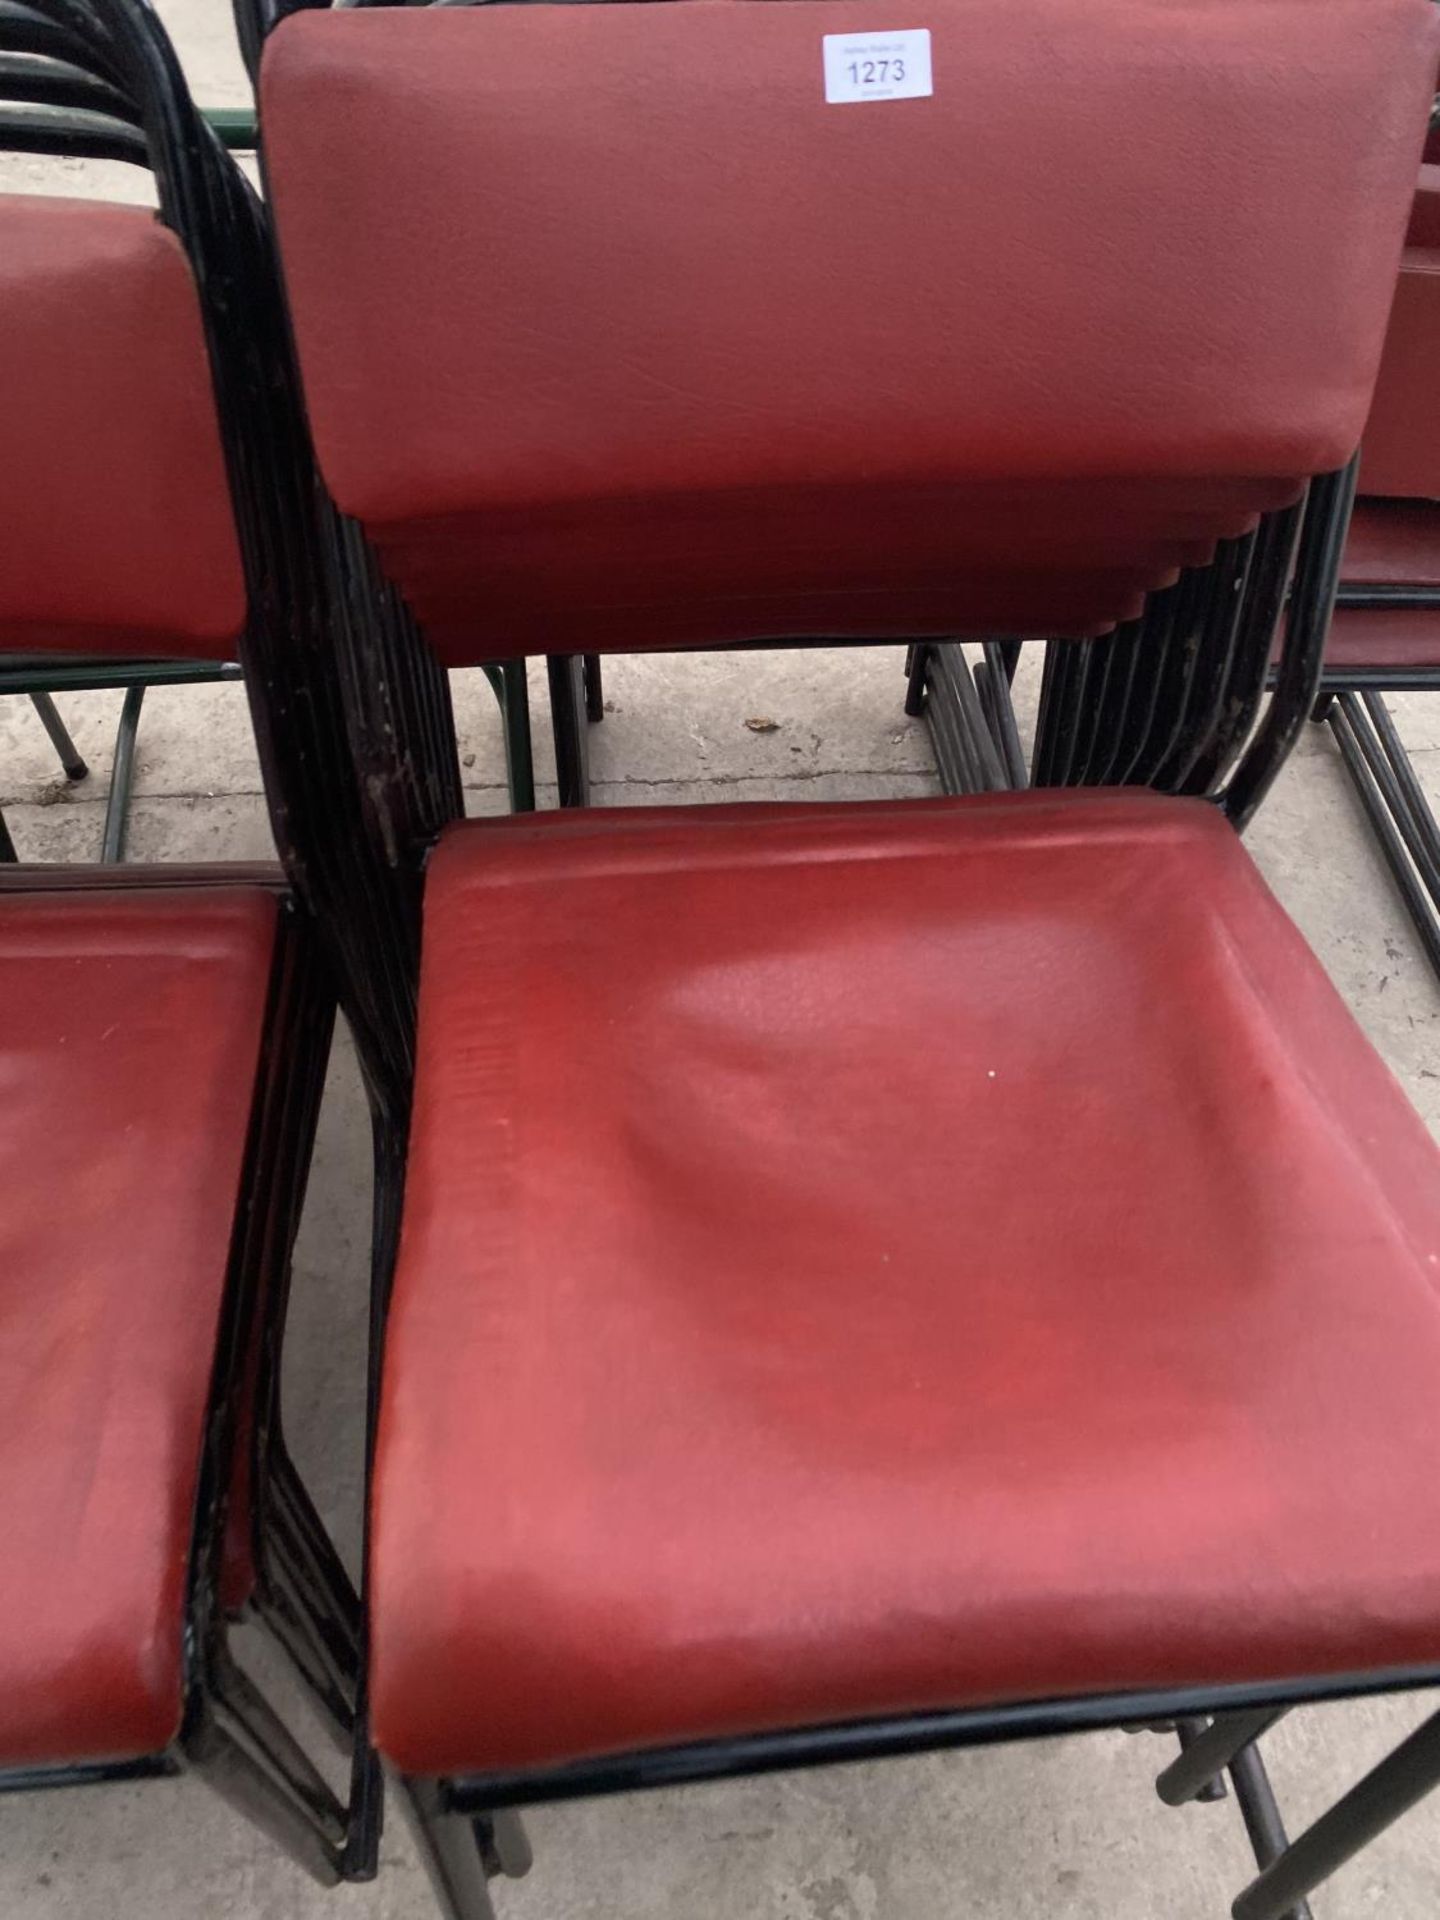 SEVEN RETRO RED LEATHER STACKING CHAIRS - Image 2 of 2